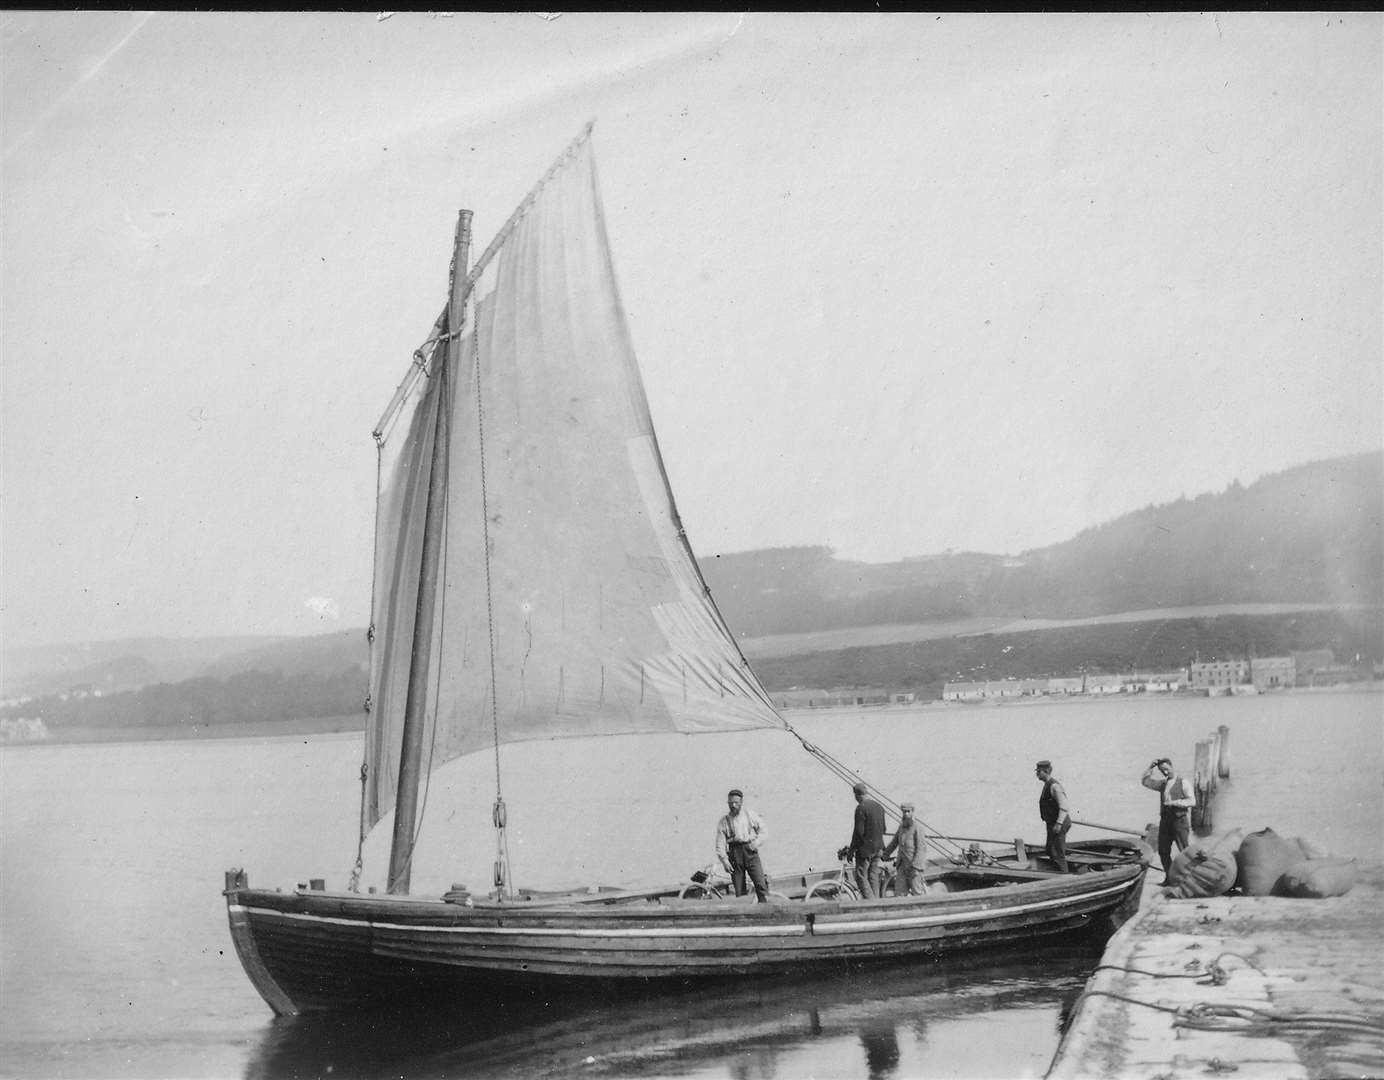 The Kessock ferry in the days of sail.